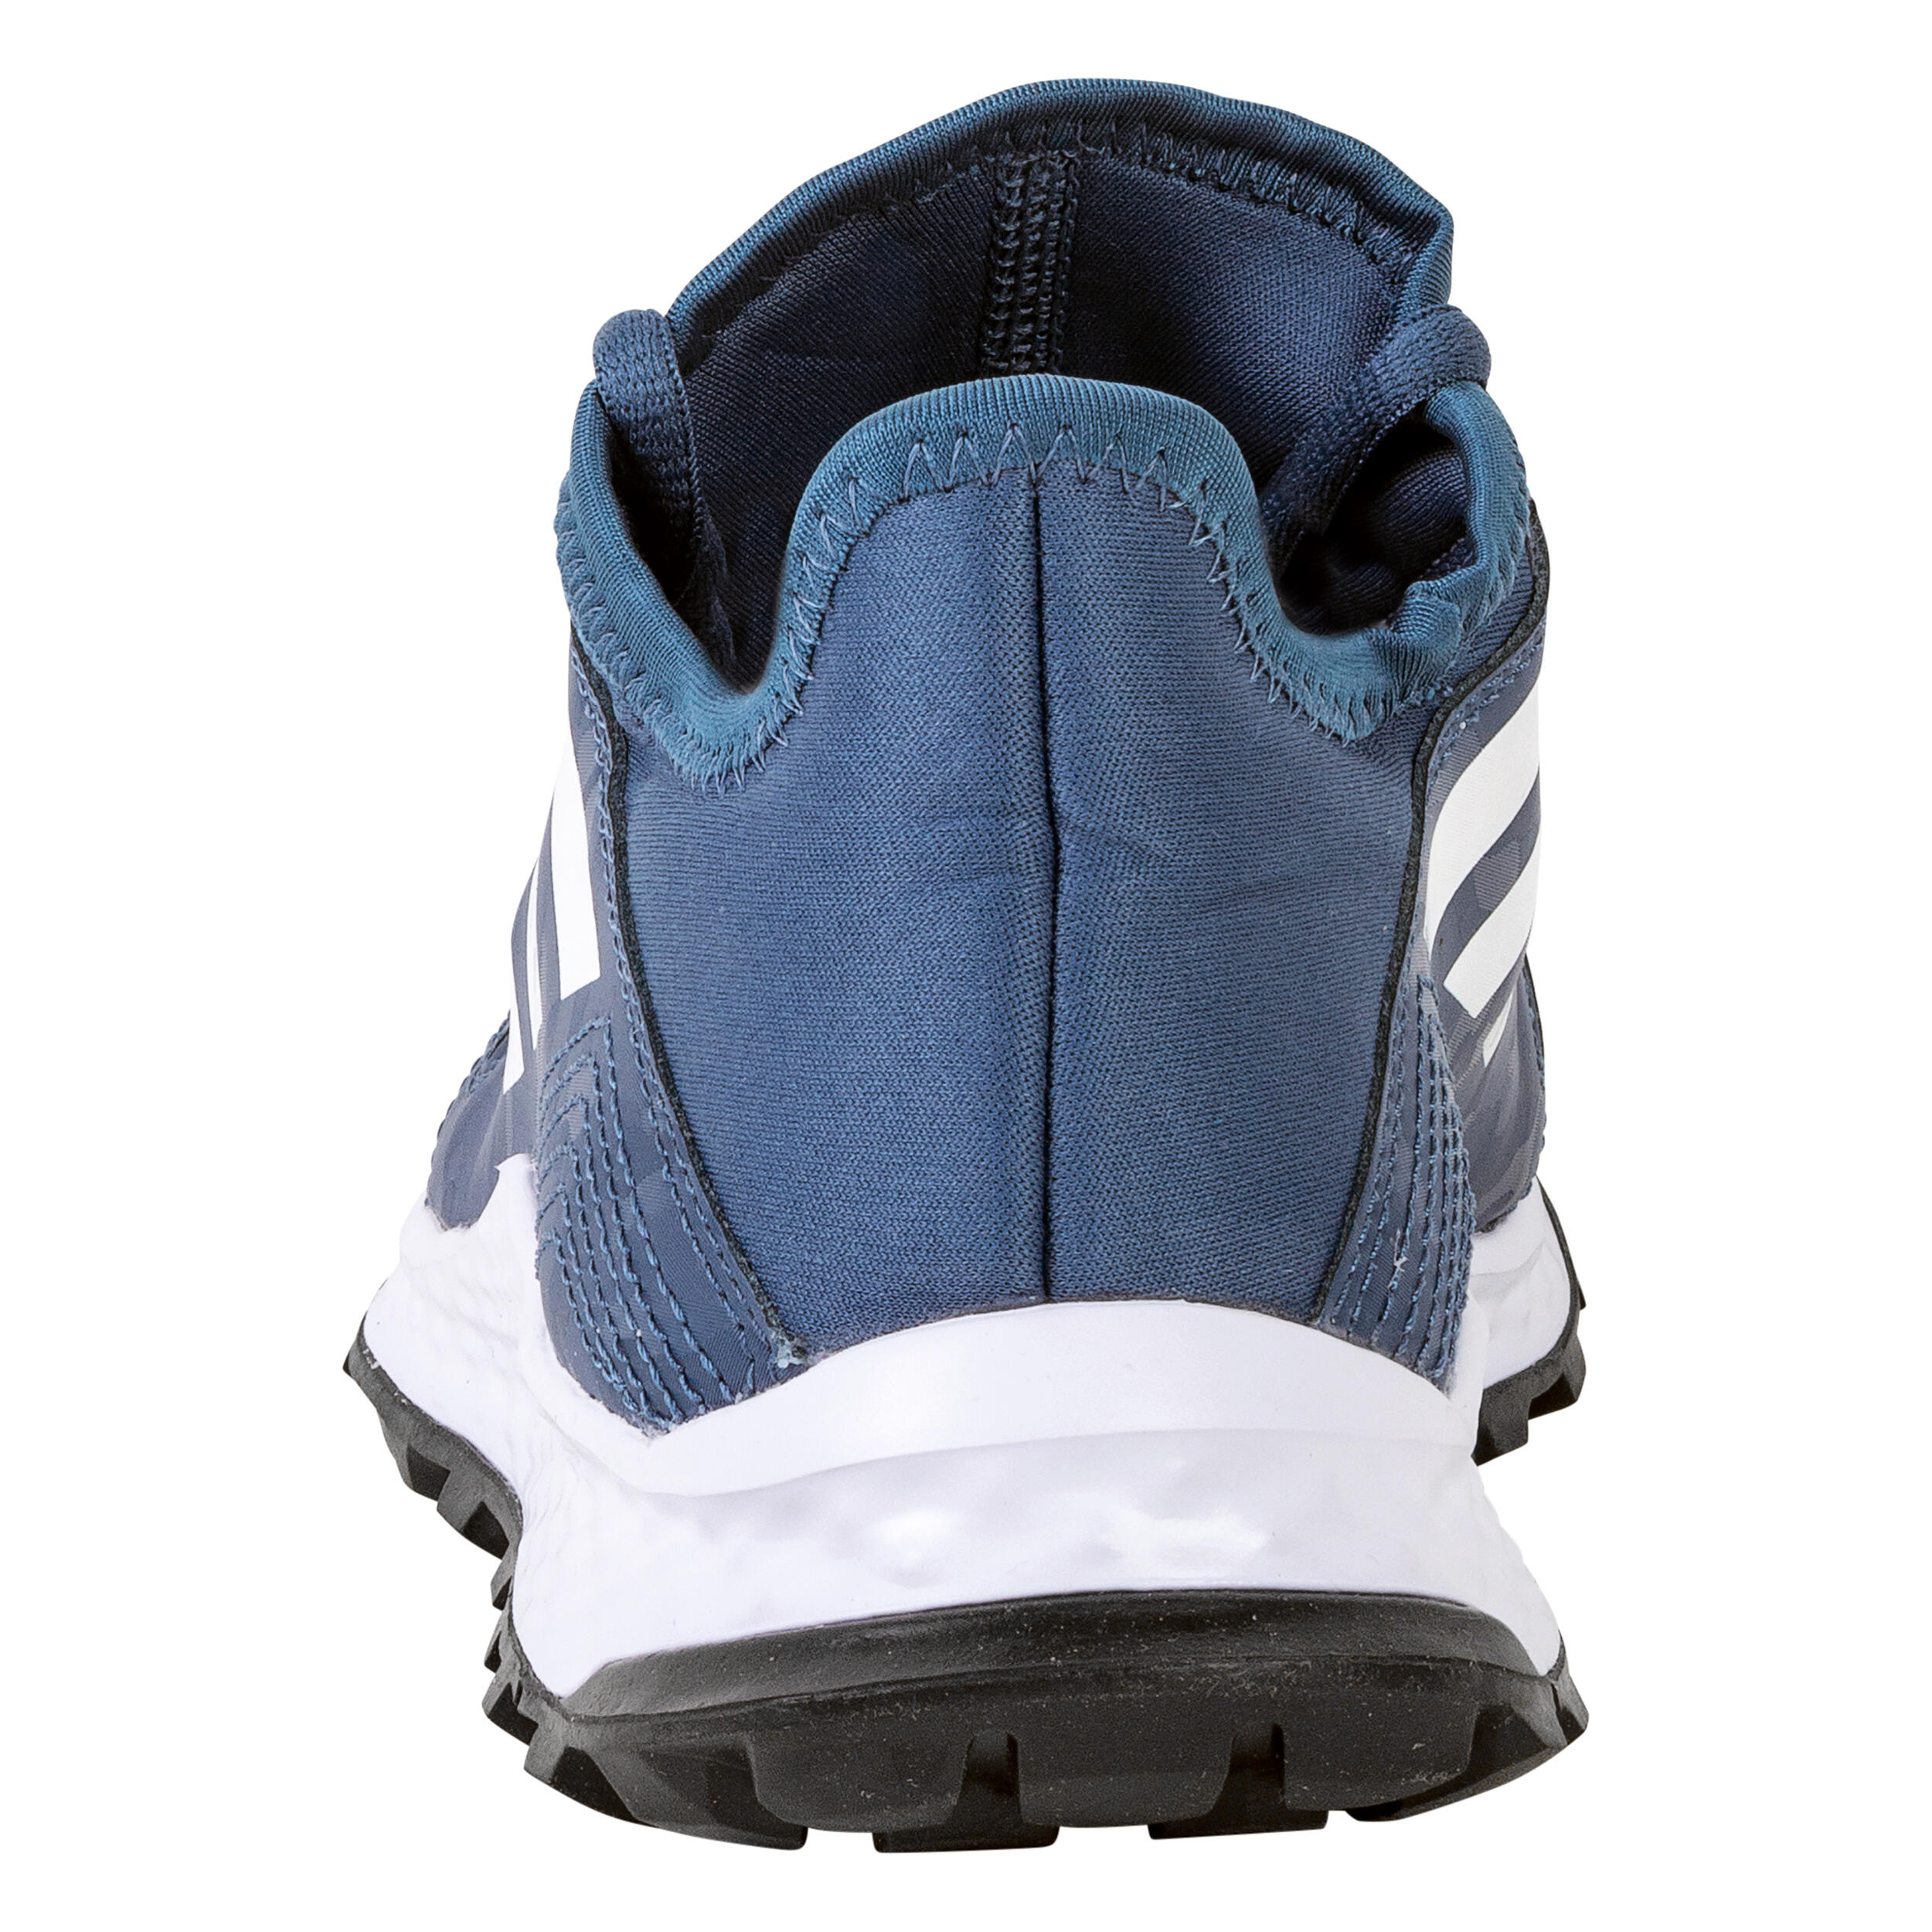 Kids' Moderate-Intensity Hockey Shoes Youngstar - Blue 5/7